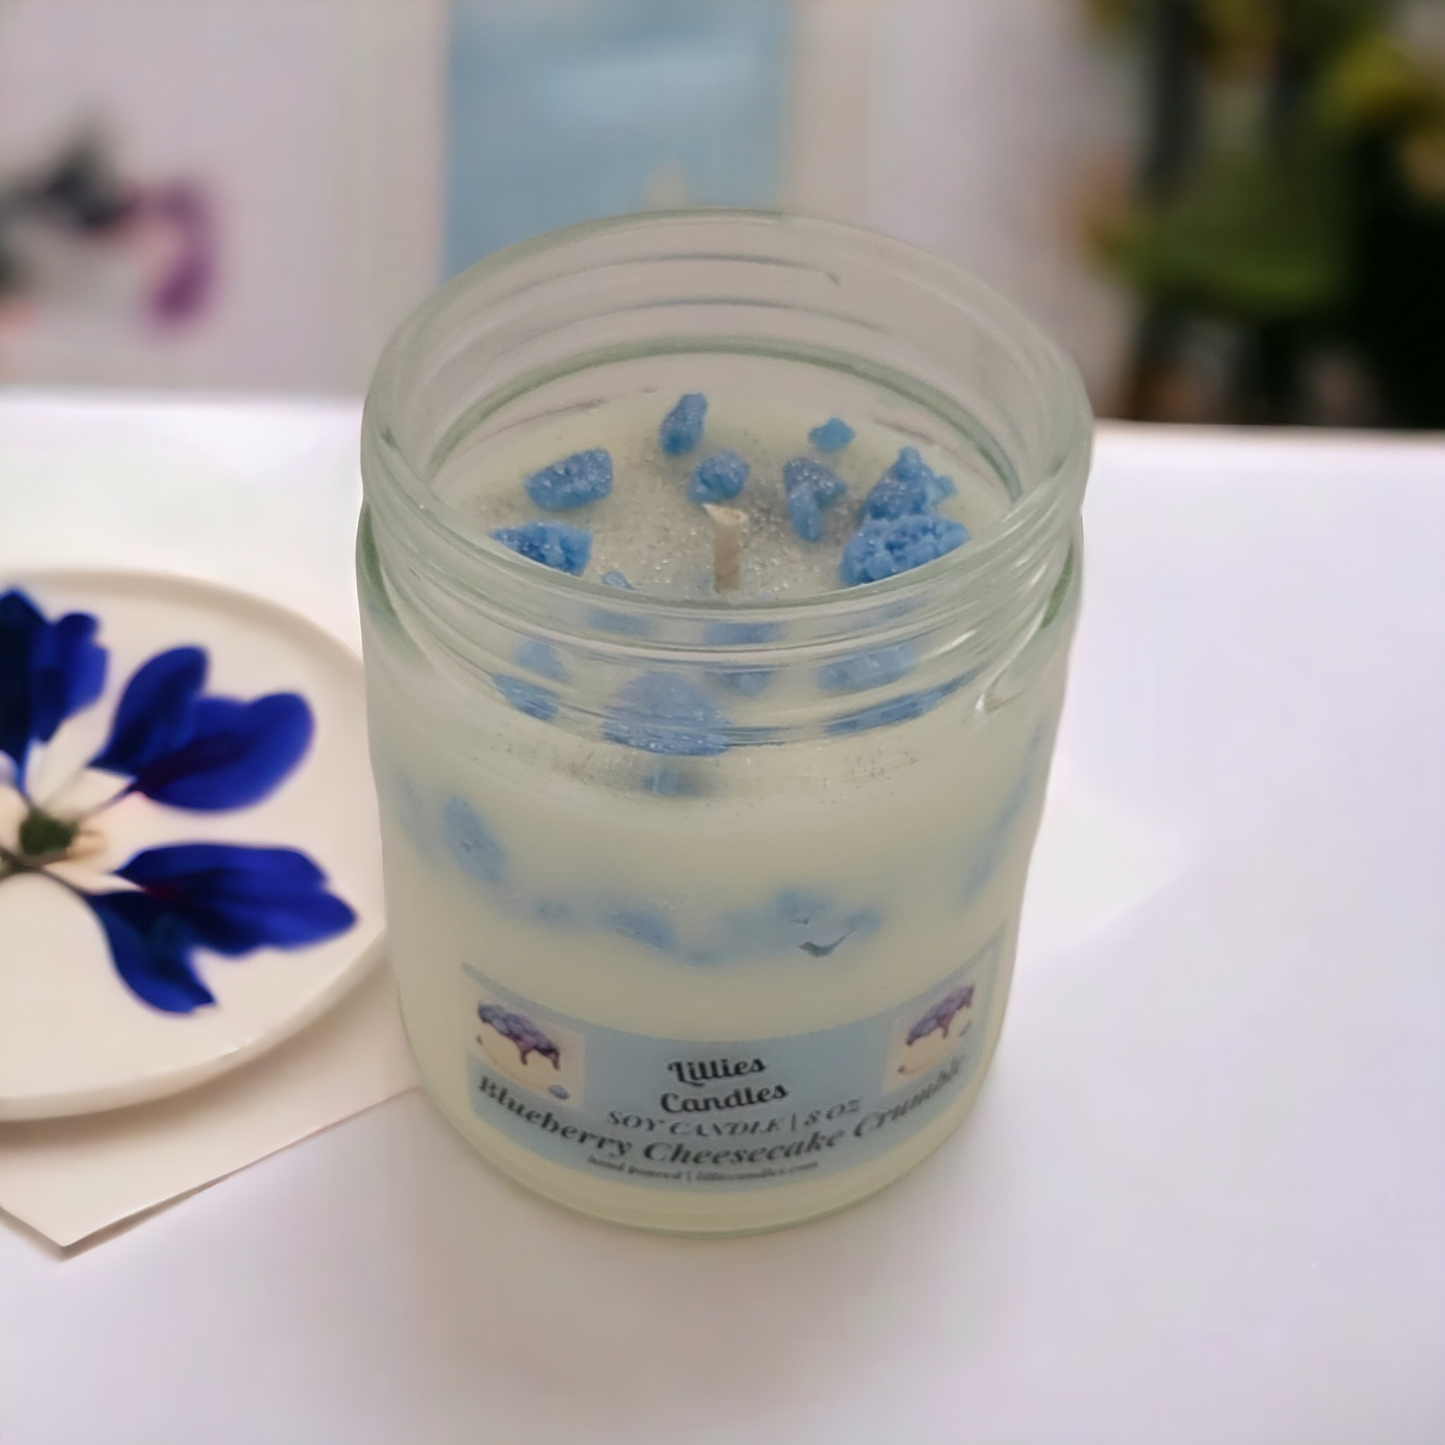 Blueberry Cheesecake Crumble Soy Candle